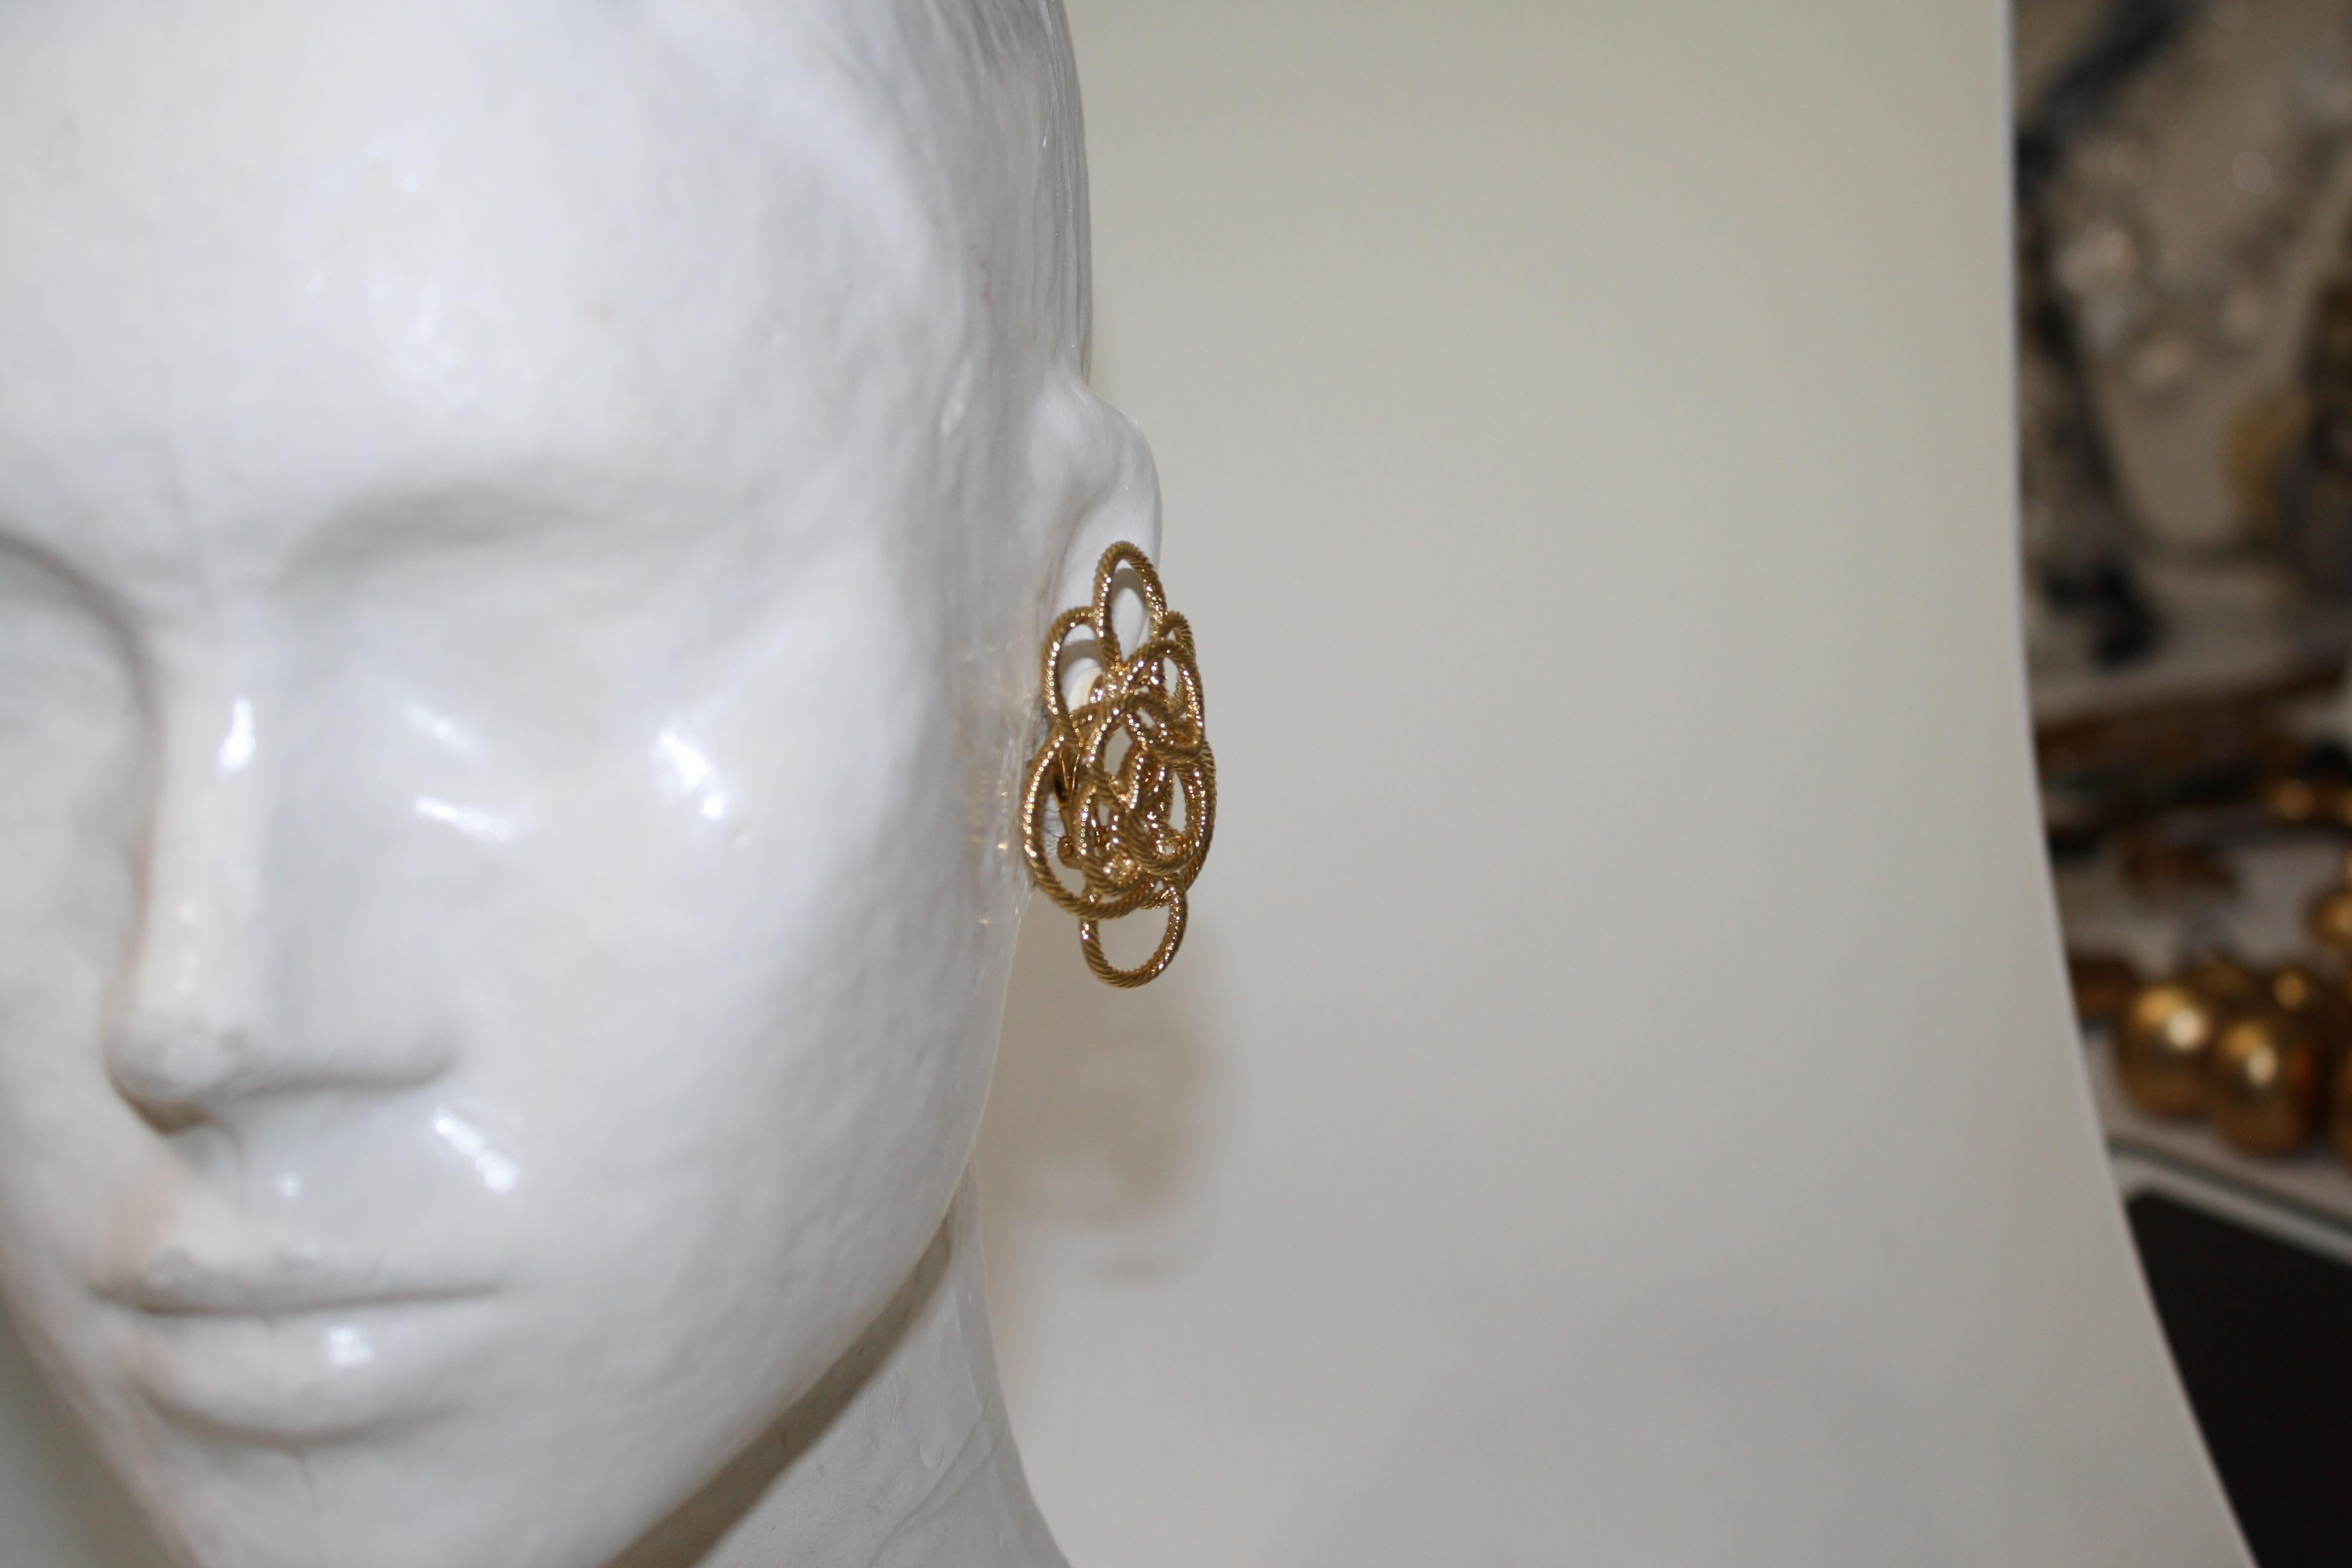 Bronze dipped in 24-carat gold braided . Clip earrings 
An intricate design of different circles create an amazing statement earring. 
Sylvie Blet, the designer was Robert Goossens personal assistant in all of his creations. She worked by his side